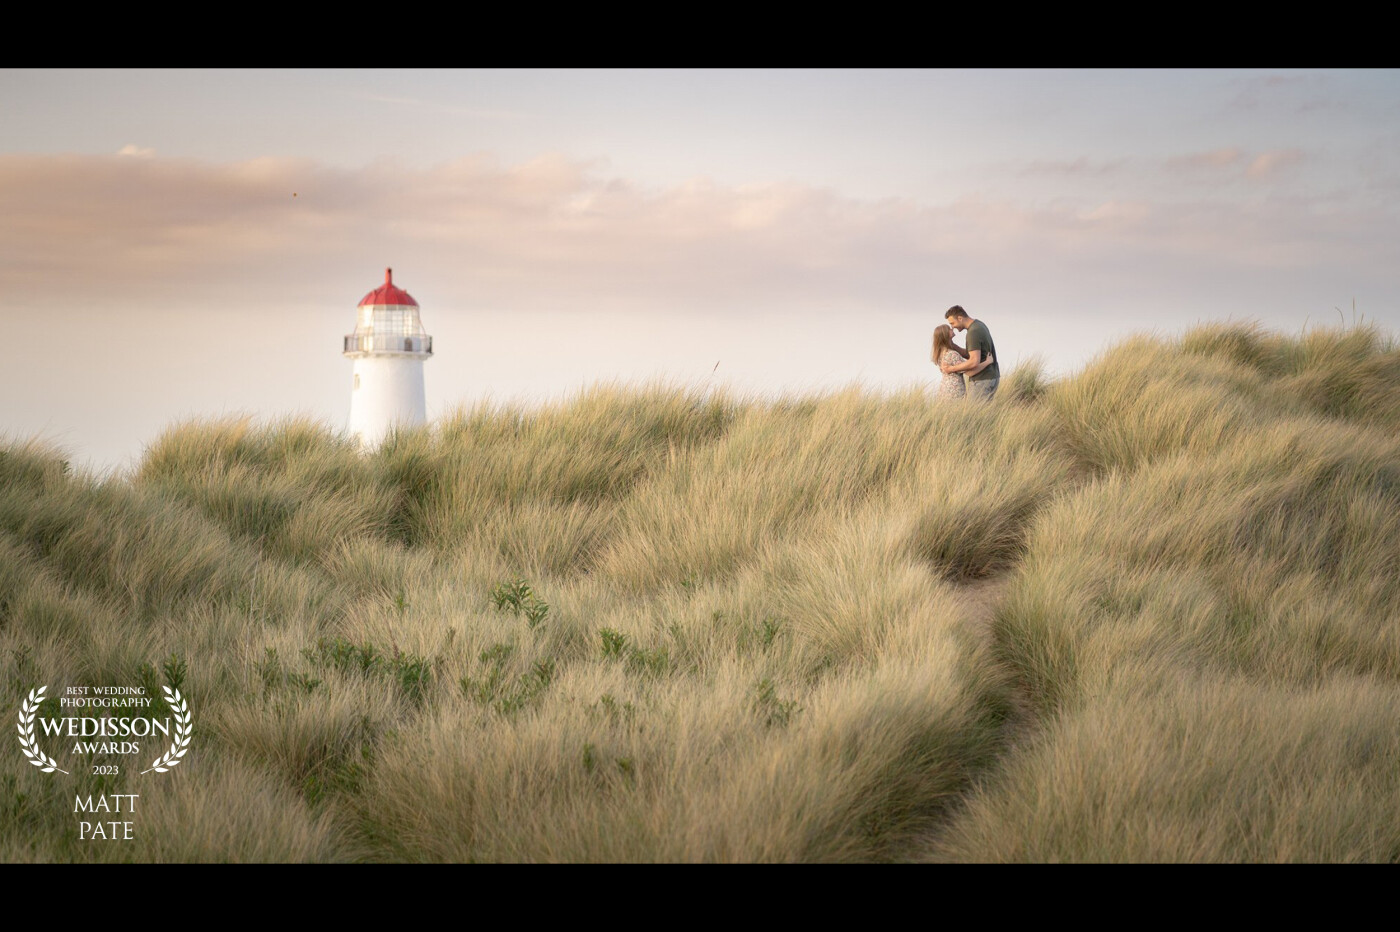 A beautiful sunset walk in the sand dunes for Emma & Rik's pre wedding shoot.<br />
I saw the leading line in the tall grass & the lighthouse in the distance, I thought this would be a great image for the couple to remember this stunning evening by.